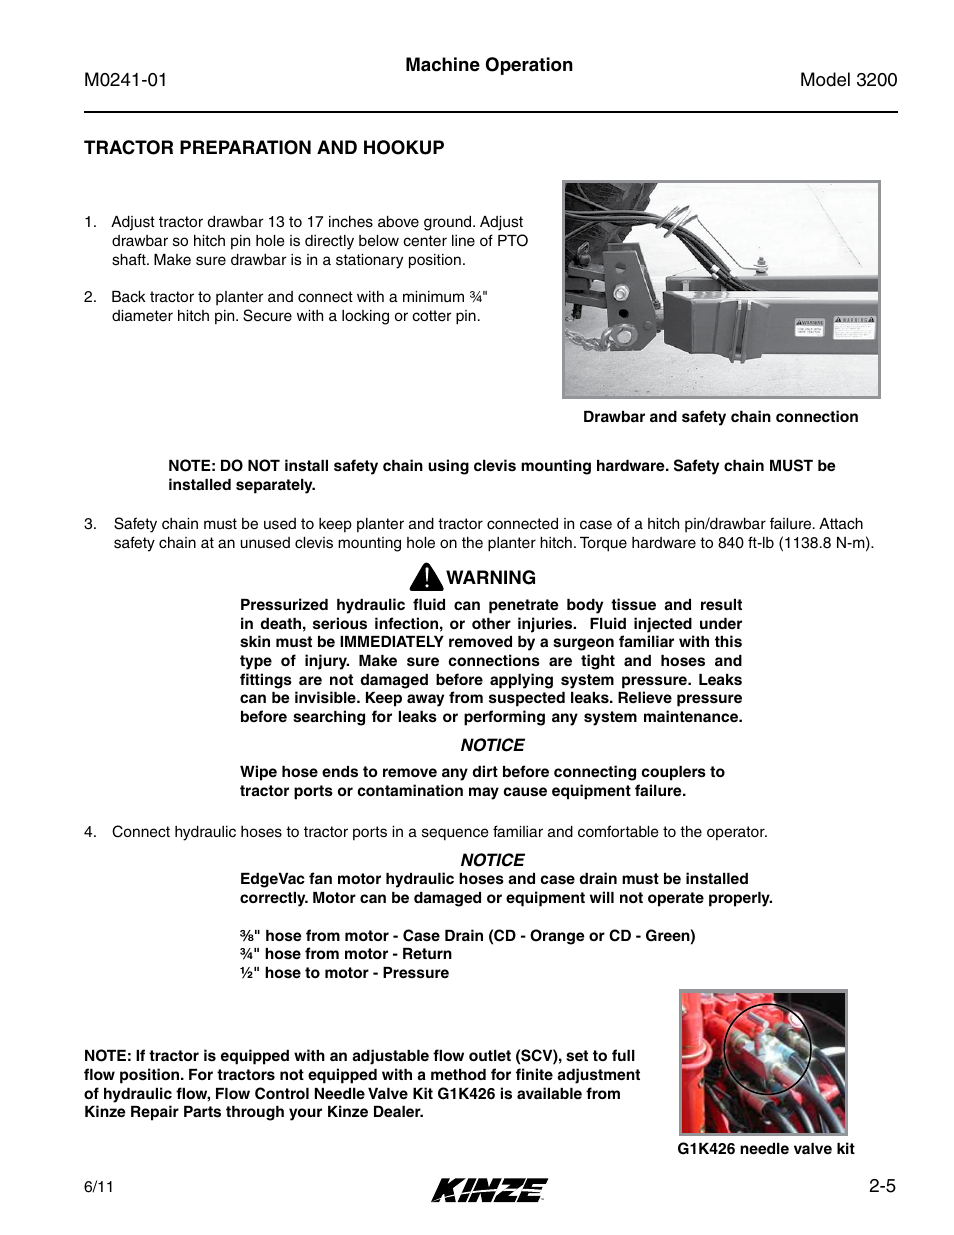 Tractor preparation and hookup, Tractor preparation and hookup -5 | Kinze 3200 Wing-Fold Planter Rev. 7/14 User Manual | Page 17 / 192